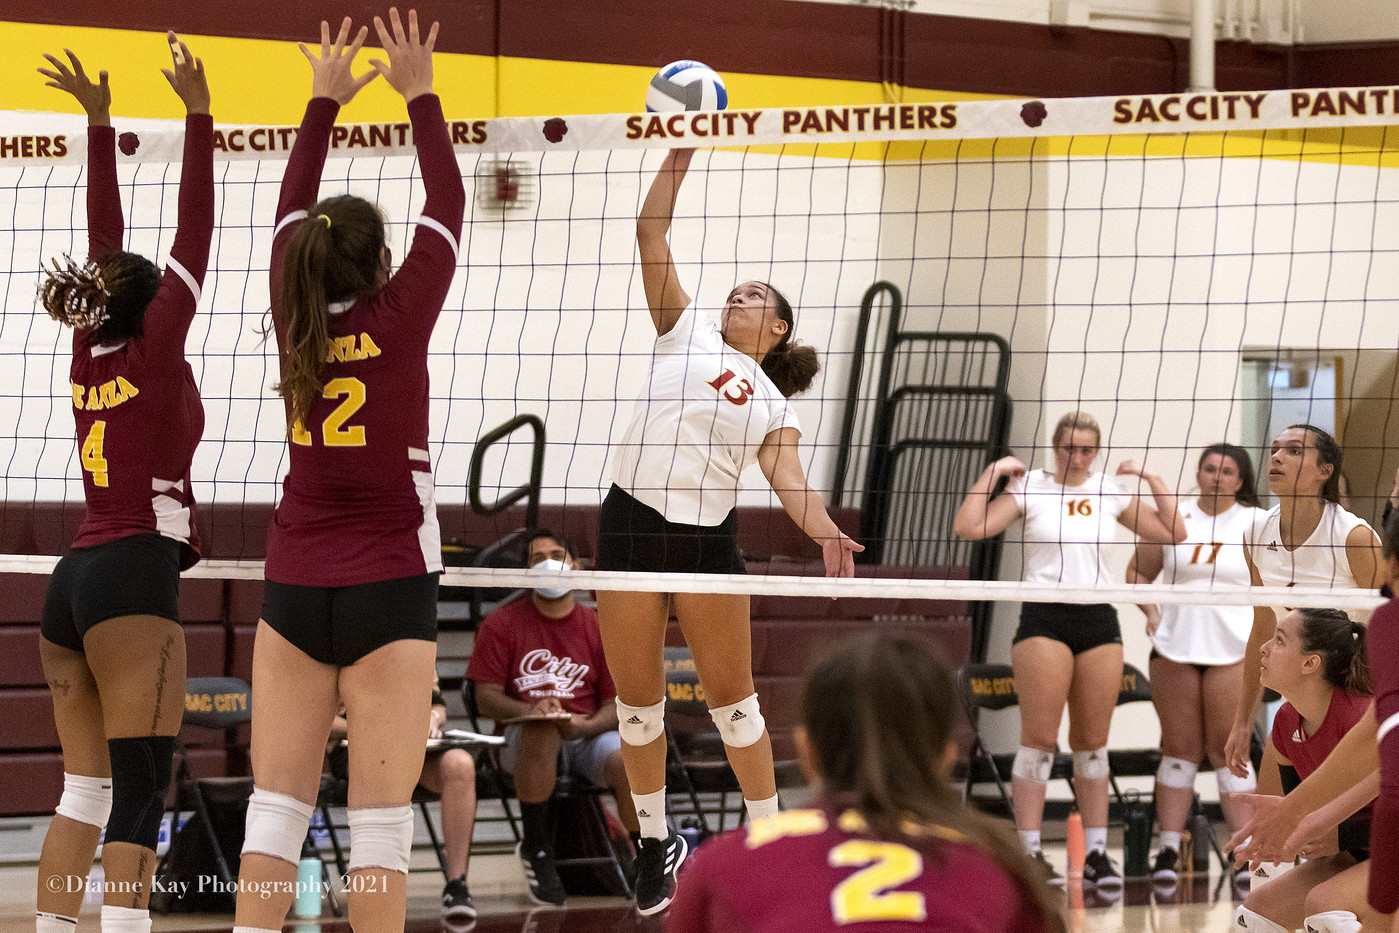 De Anza beats the Panthers 3-0 (25-20, 26-24, 25-22) in the opener of the Sac City Classic